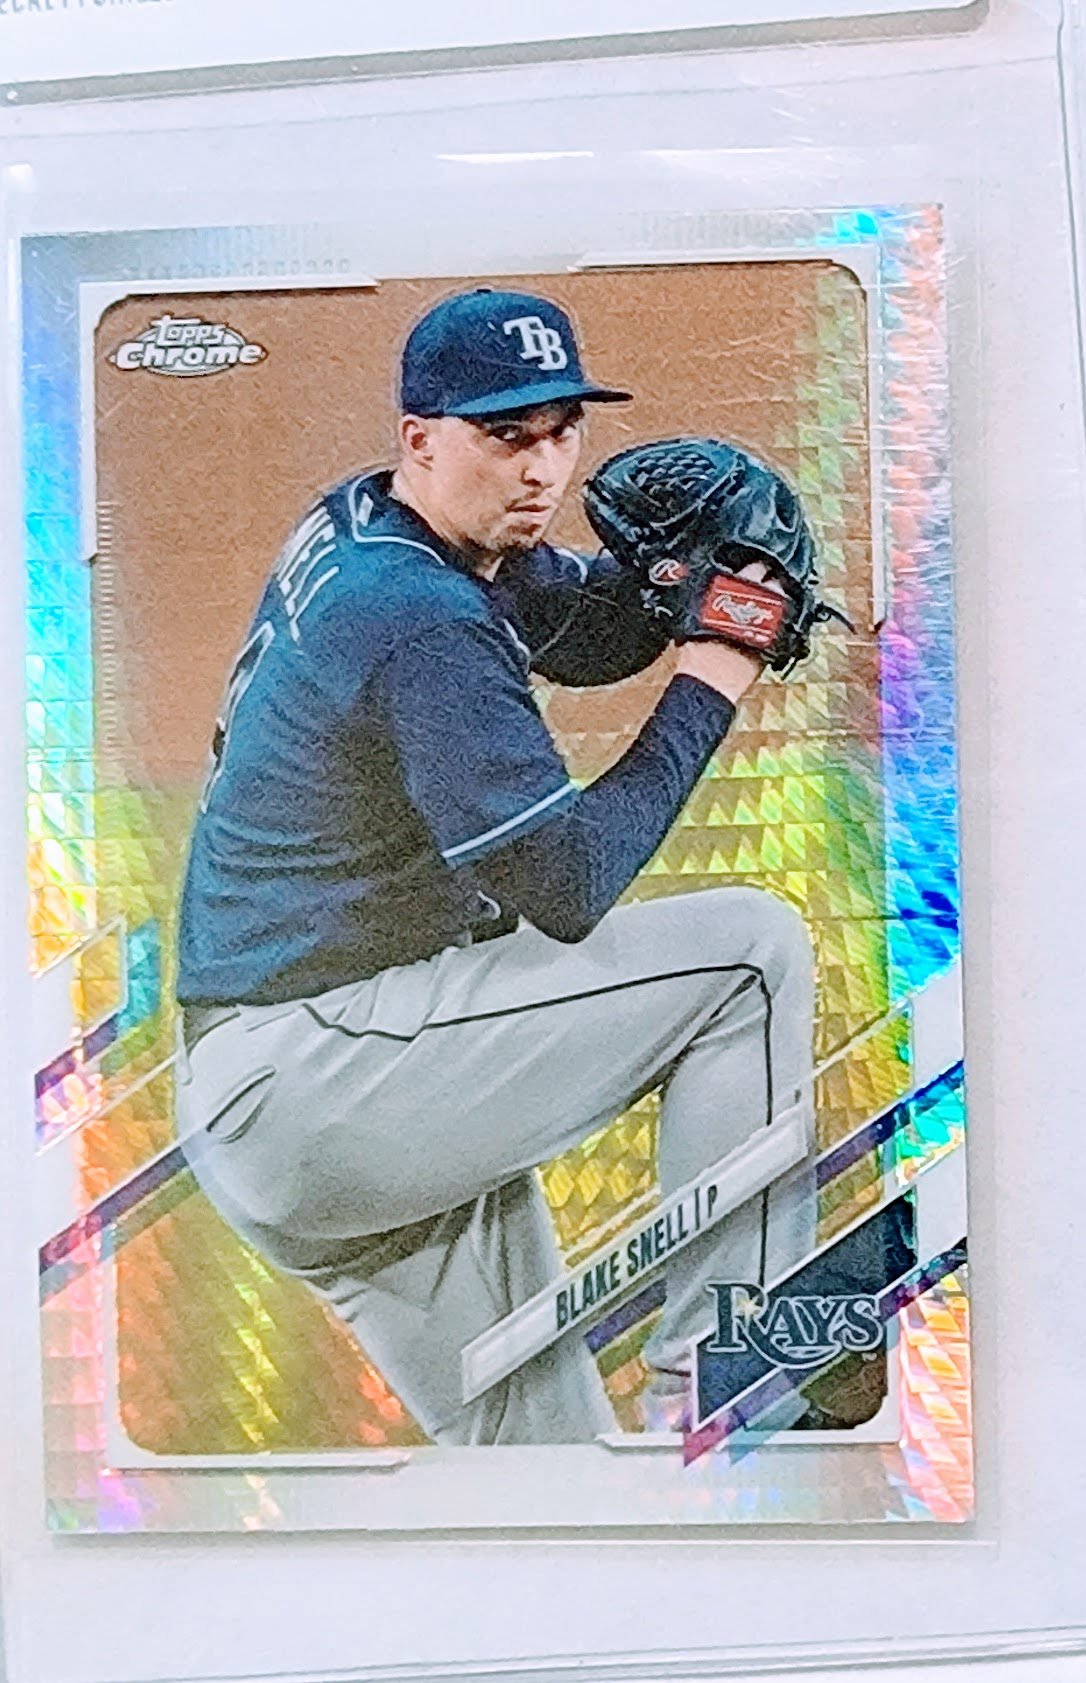 2021 Topps Chrome Blake Snell Prism Refractor Baseball Card TPTV simple Xclusive Collectibles   